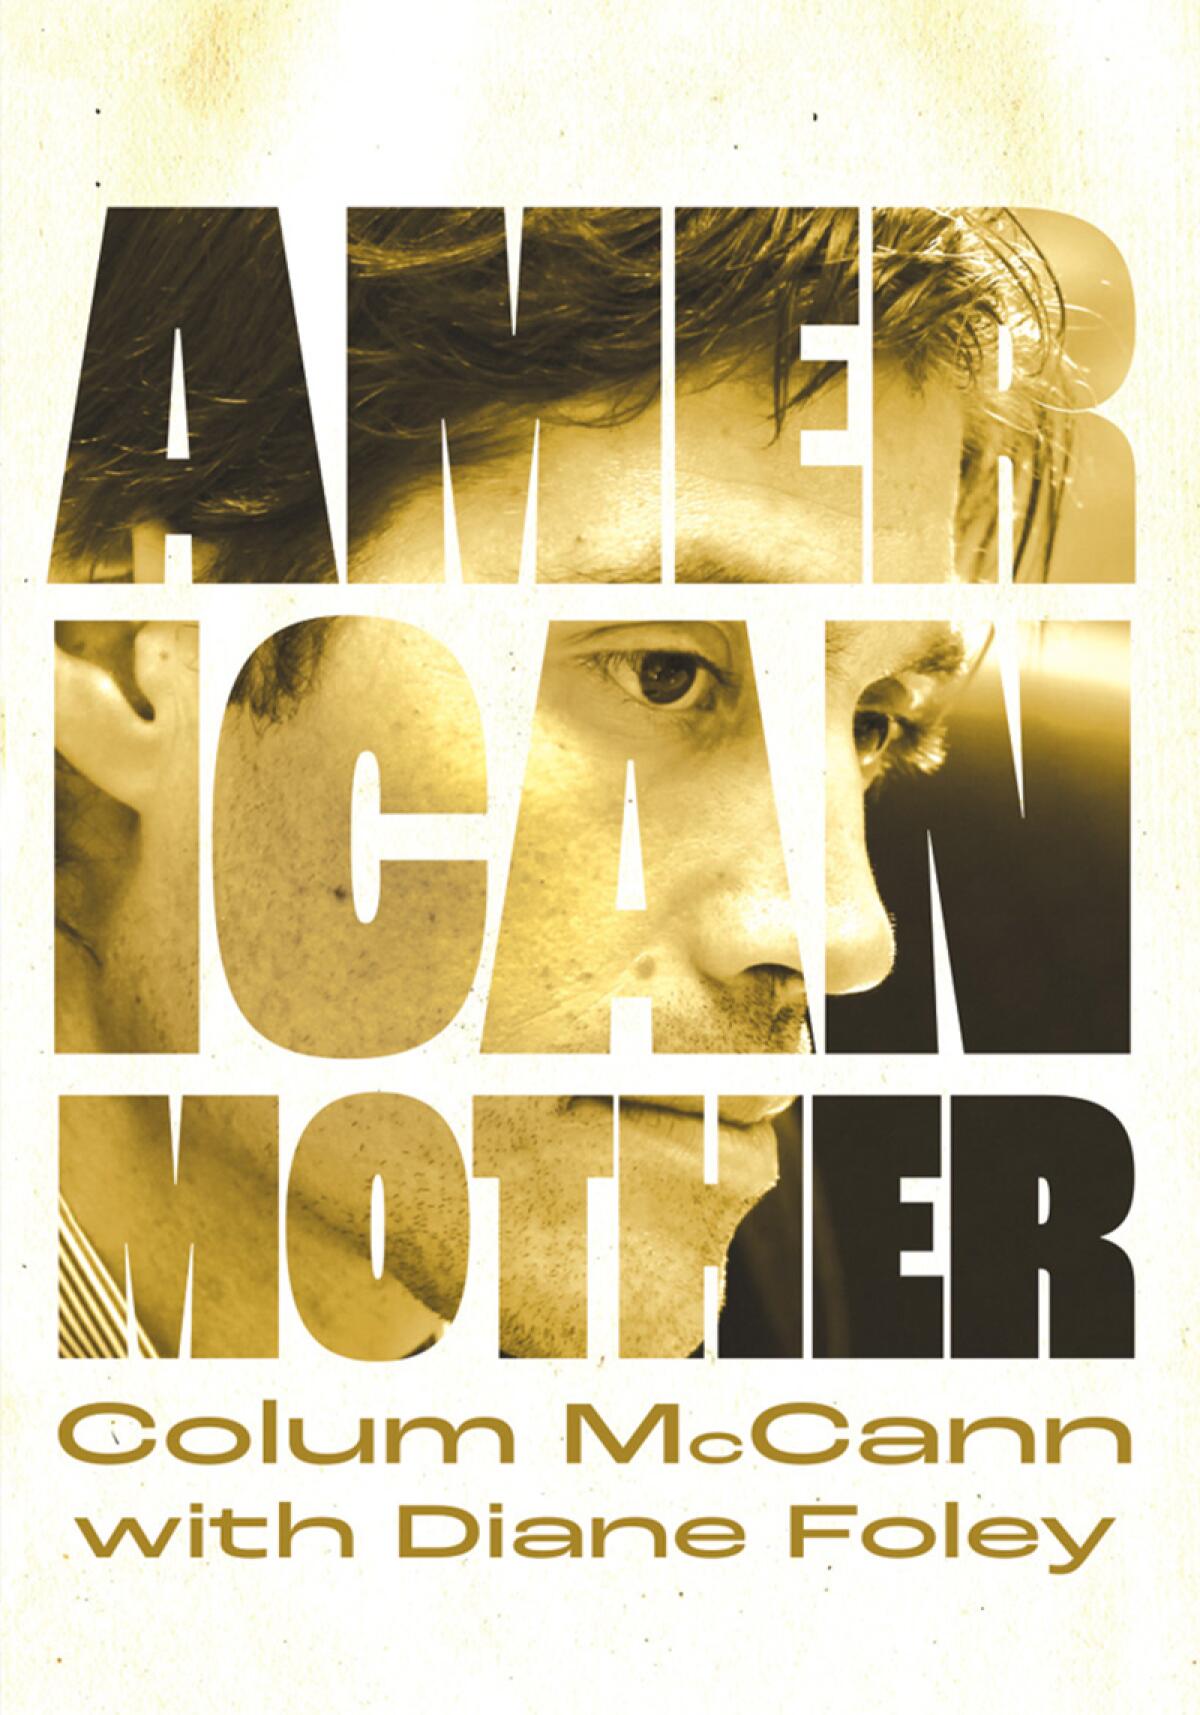 Book jacket for "American Mother" by Colum McCann with Diane Foley.